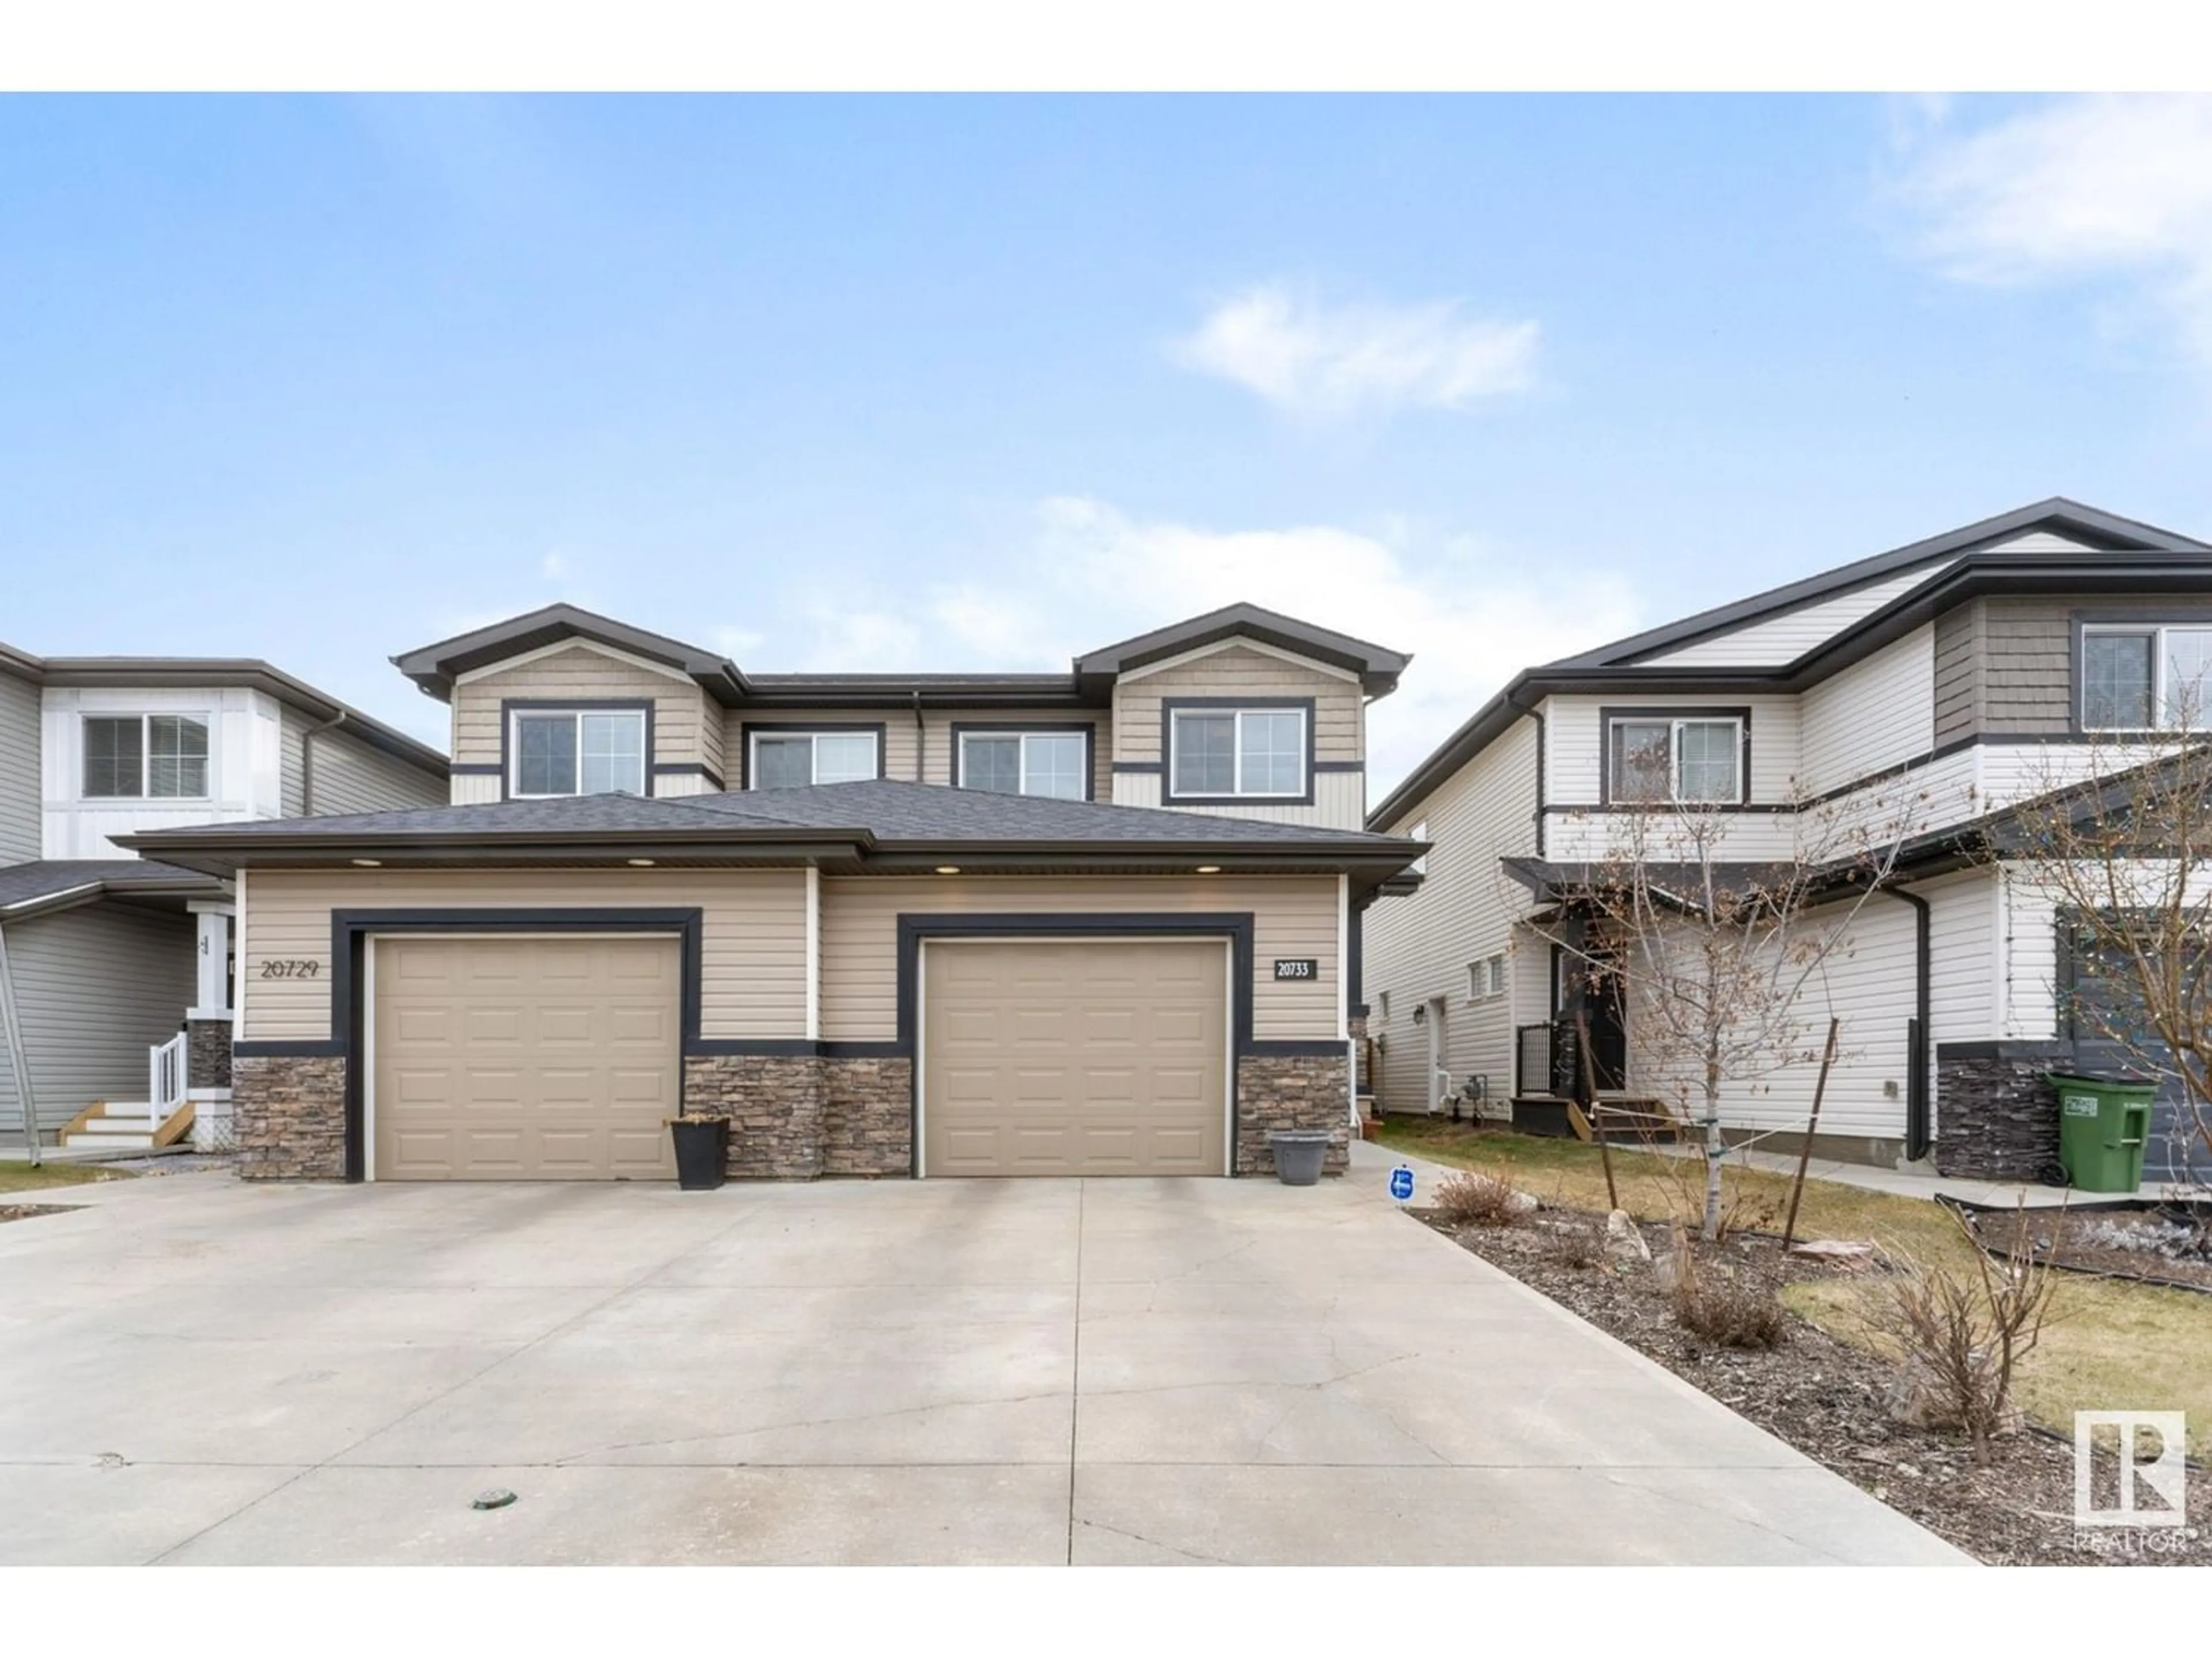 A pic from exterior of the house or condo for 20733 99A AV NW, Edmonton Alberta T5T7G4